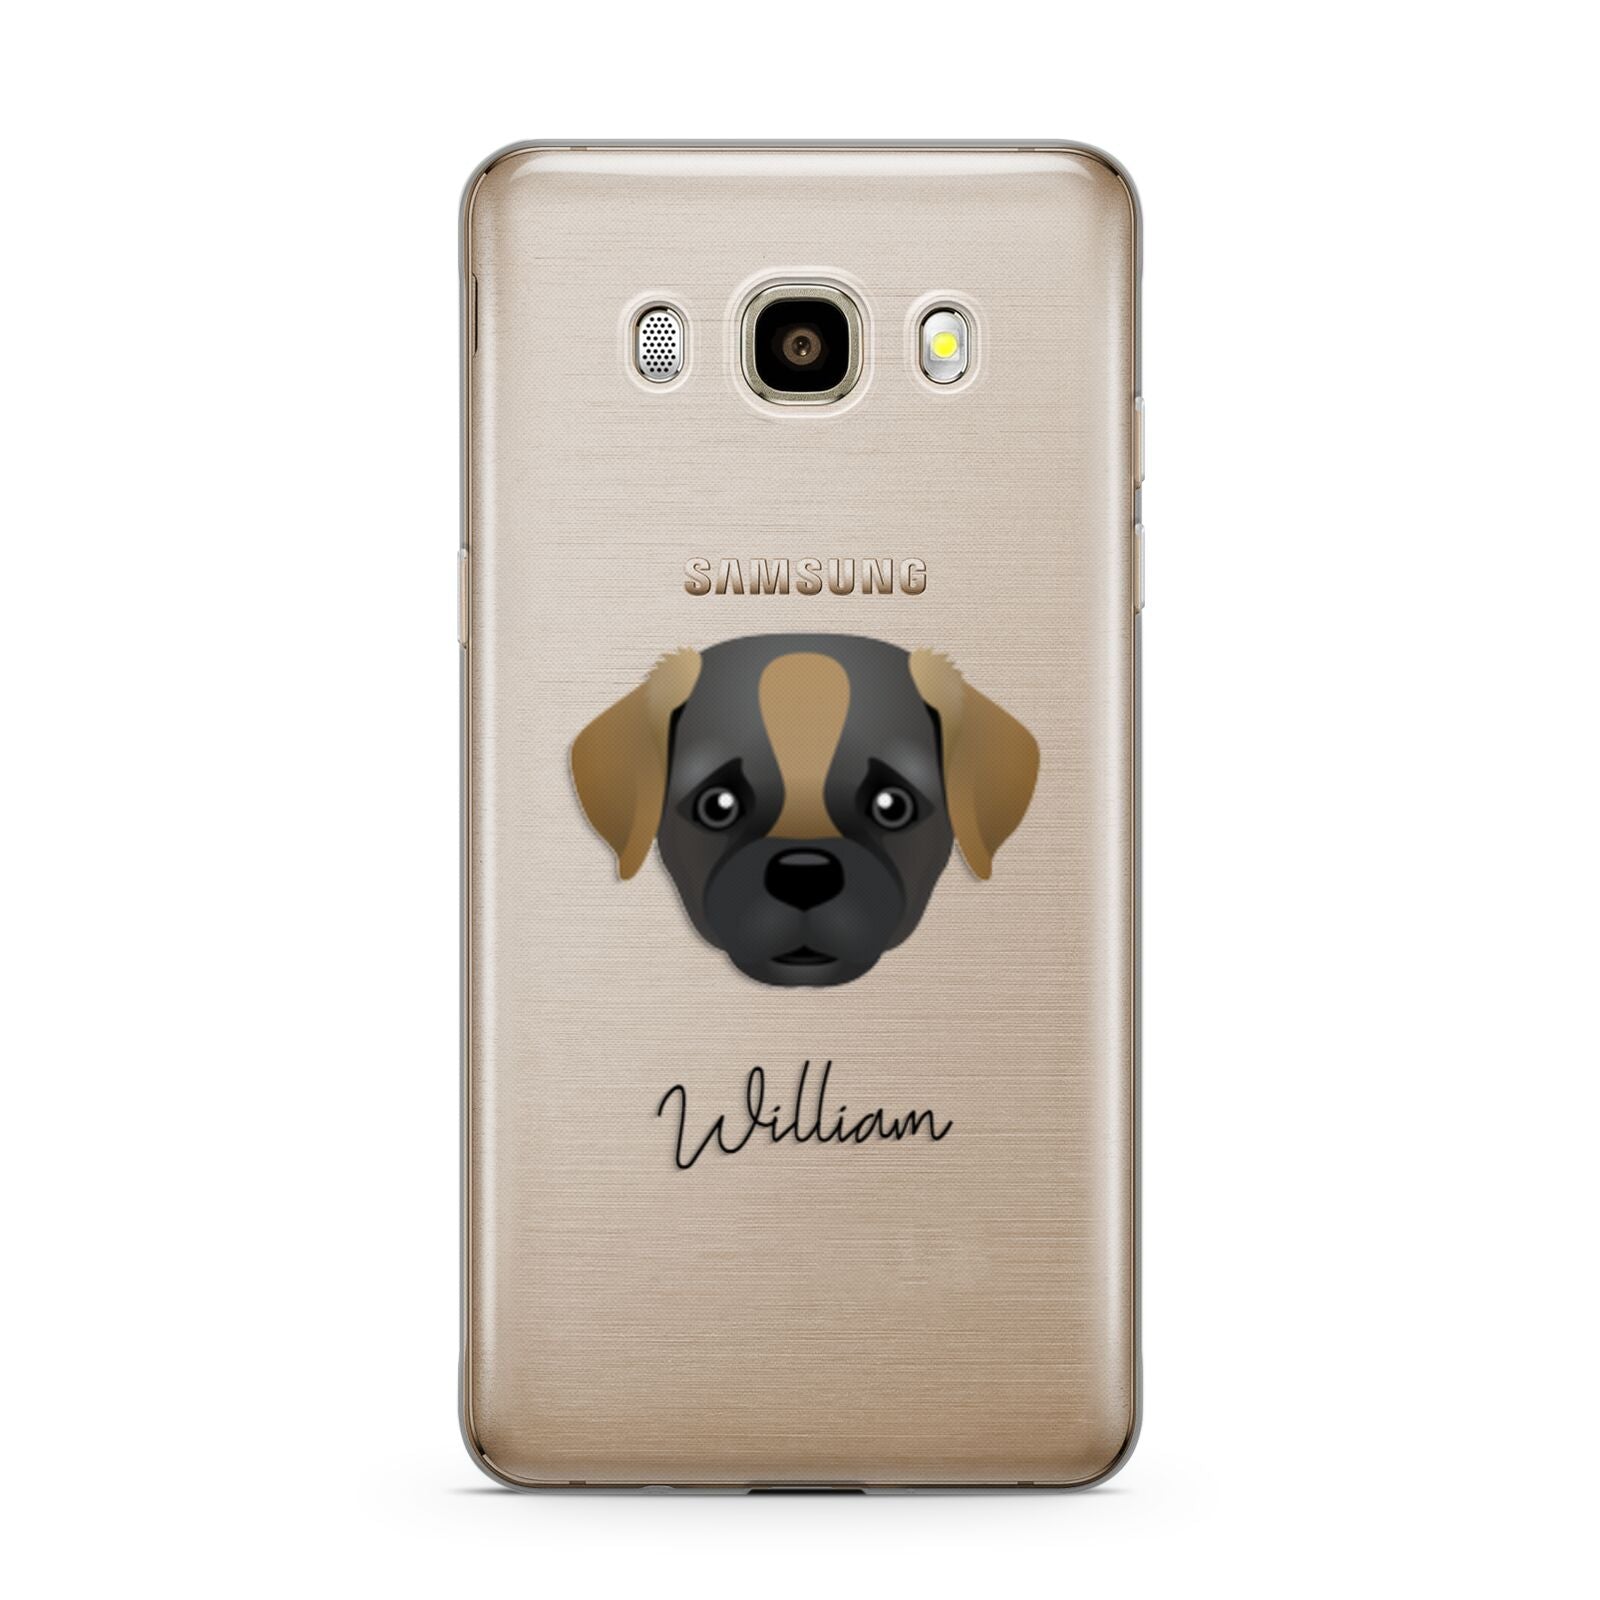 Pugapoo Personalised Samsung Galaxy J7 2016 Case on gold phone